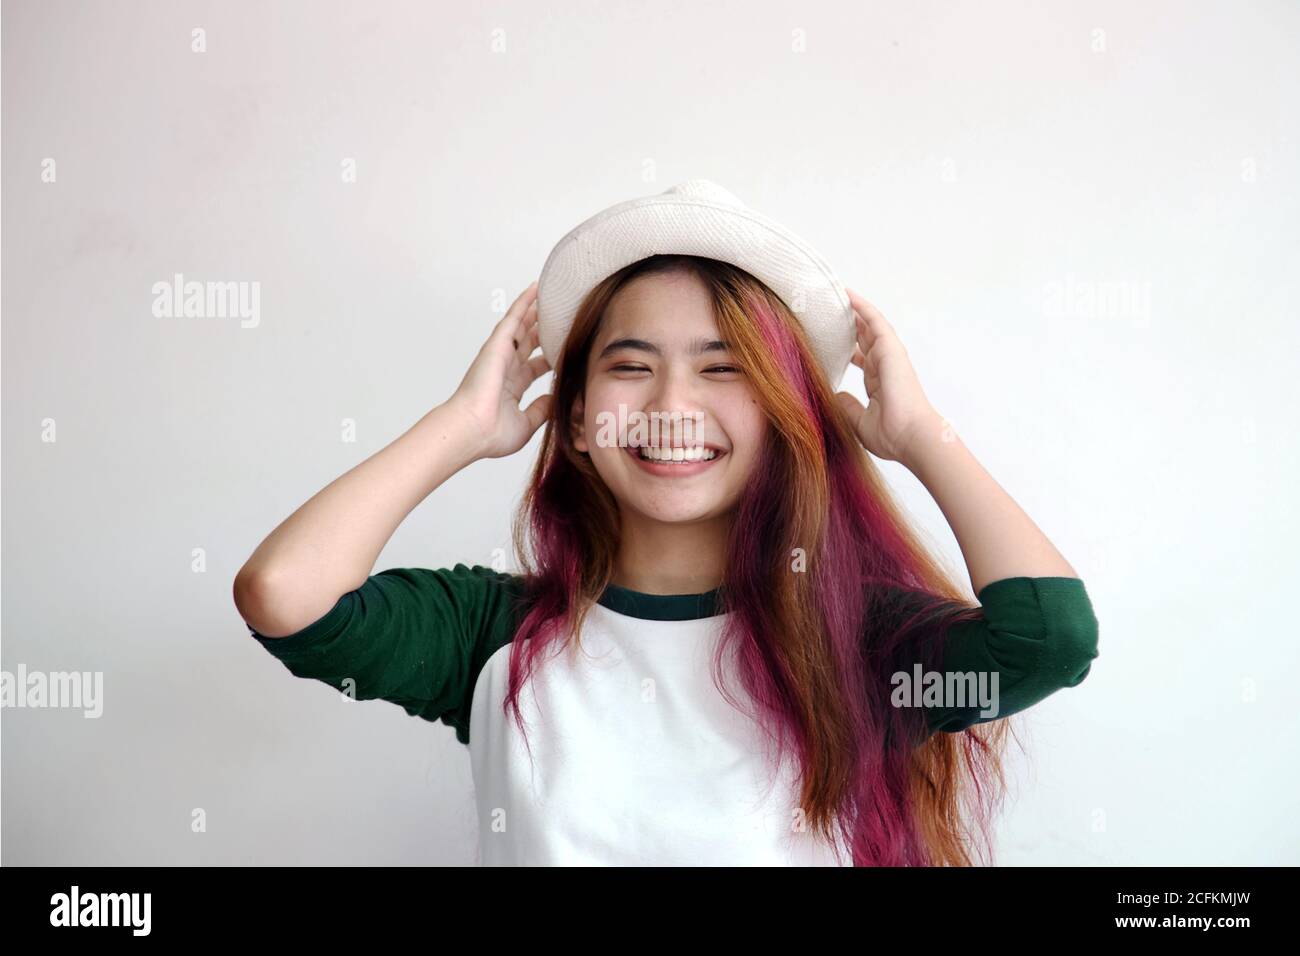 pretty asian femele smiling joyfully with colorful hair in dressed casually like hipster lifestyle, hair fashion concept. Stock Photo